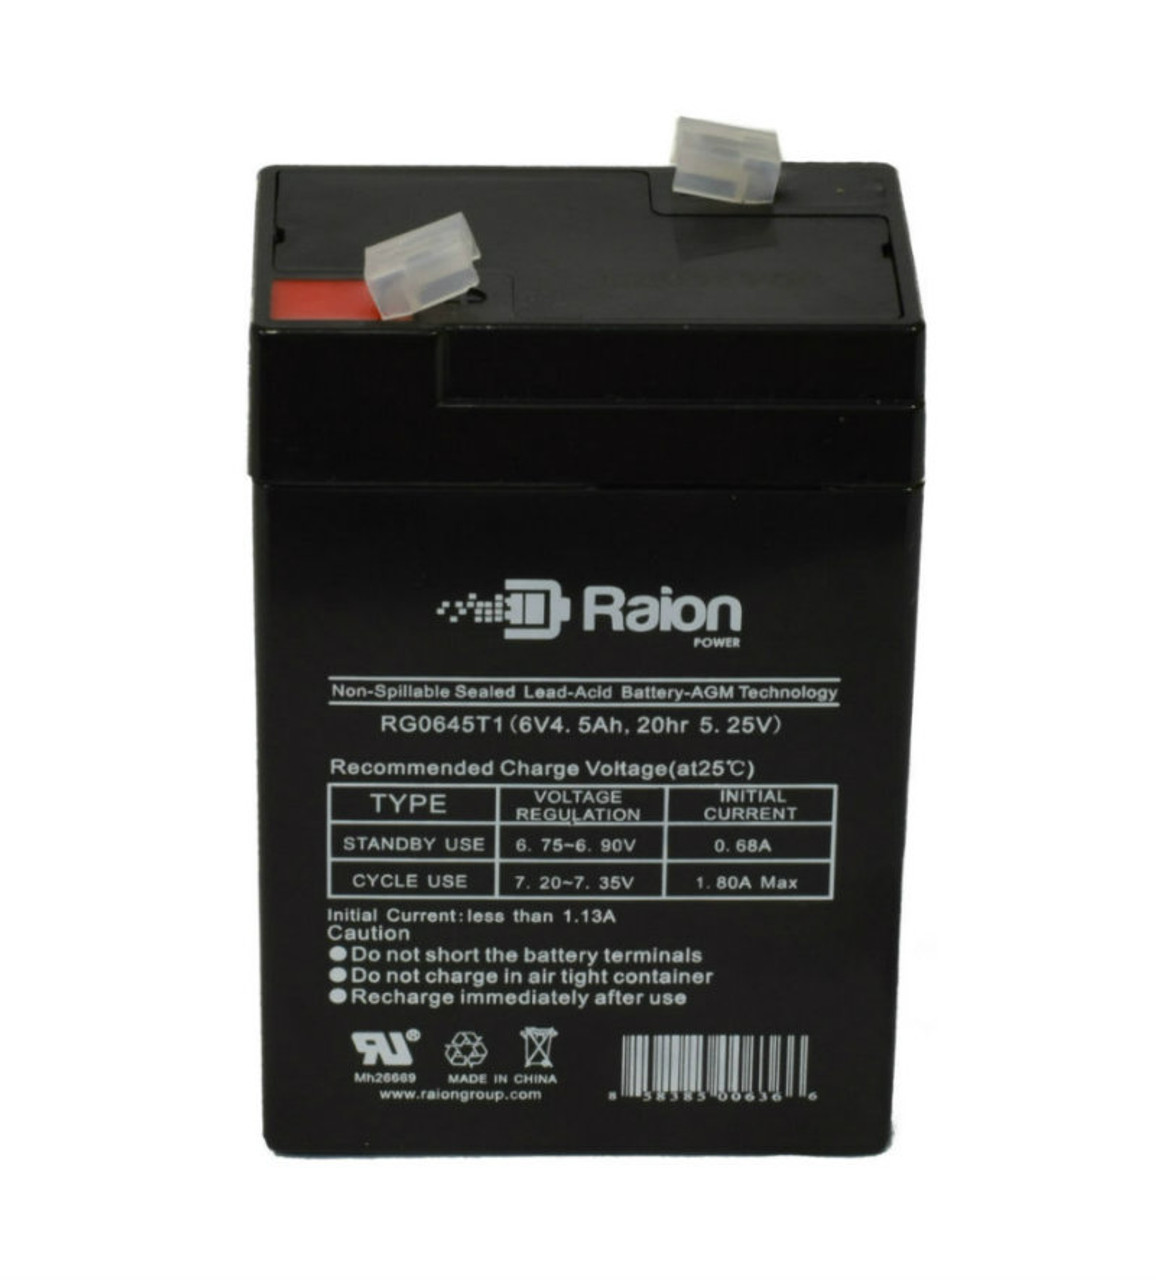 Raion Power RG0645T1 Replacement Battery Cartridge for Sunlight SPA 6-4.5